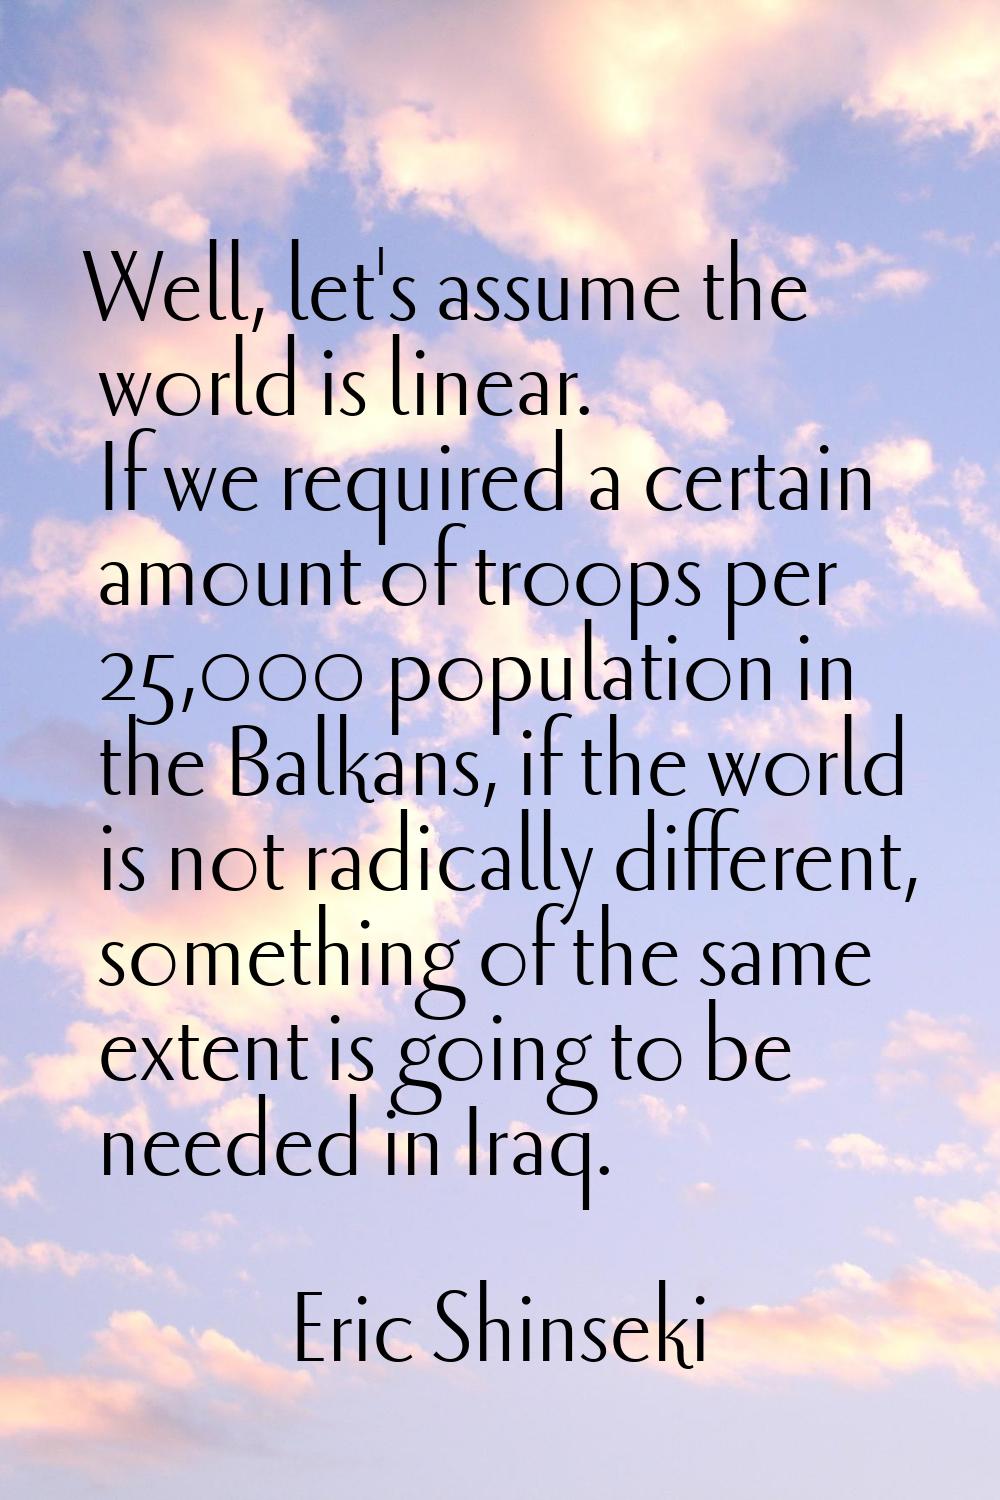 Well, let's assume the world is linear. If we required a certain amount of troops per 25,000 popula